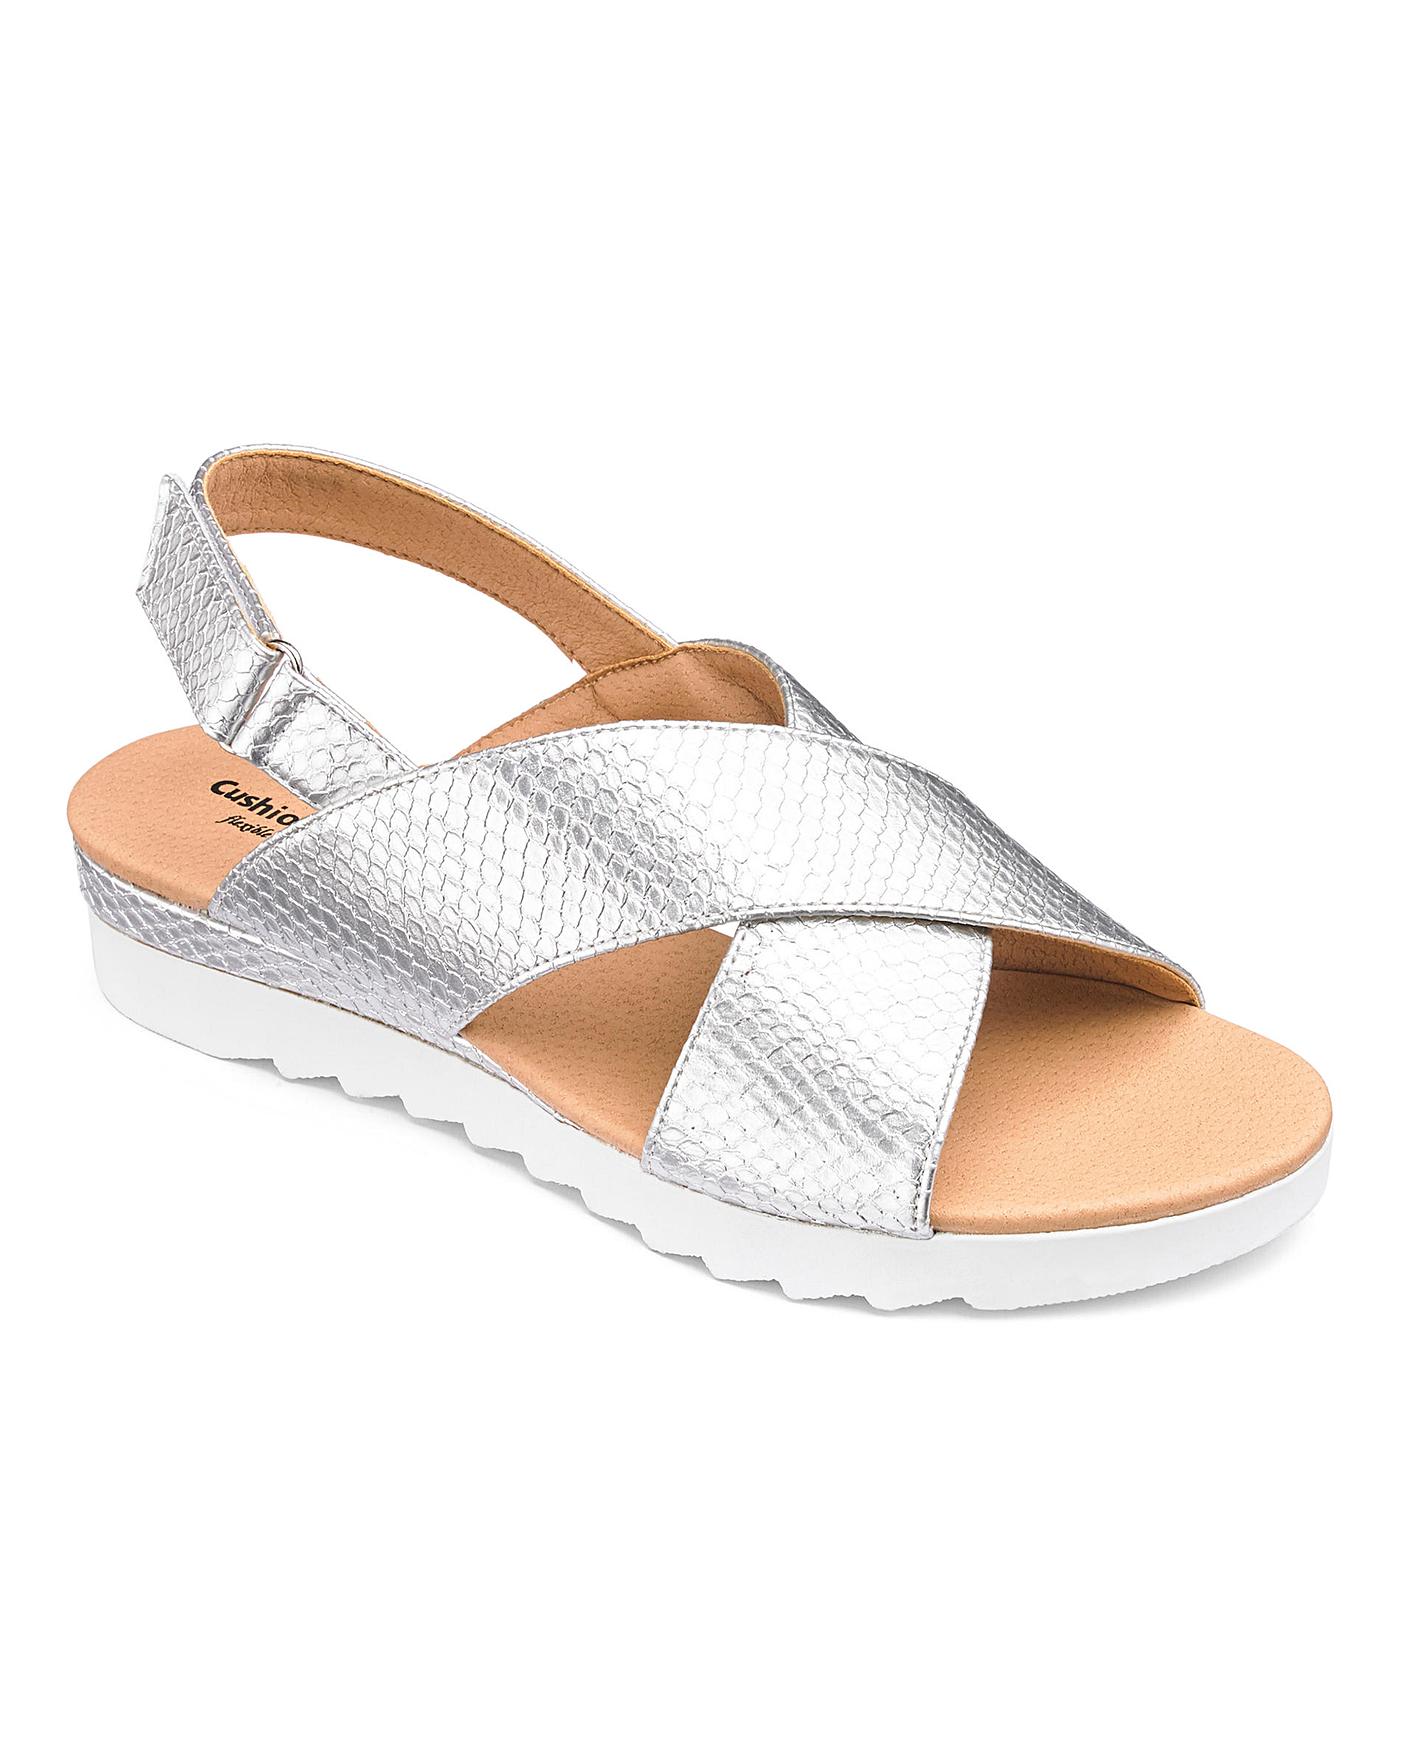 Cushion Walk Crossover Sandals E Fit | House of Bath